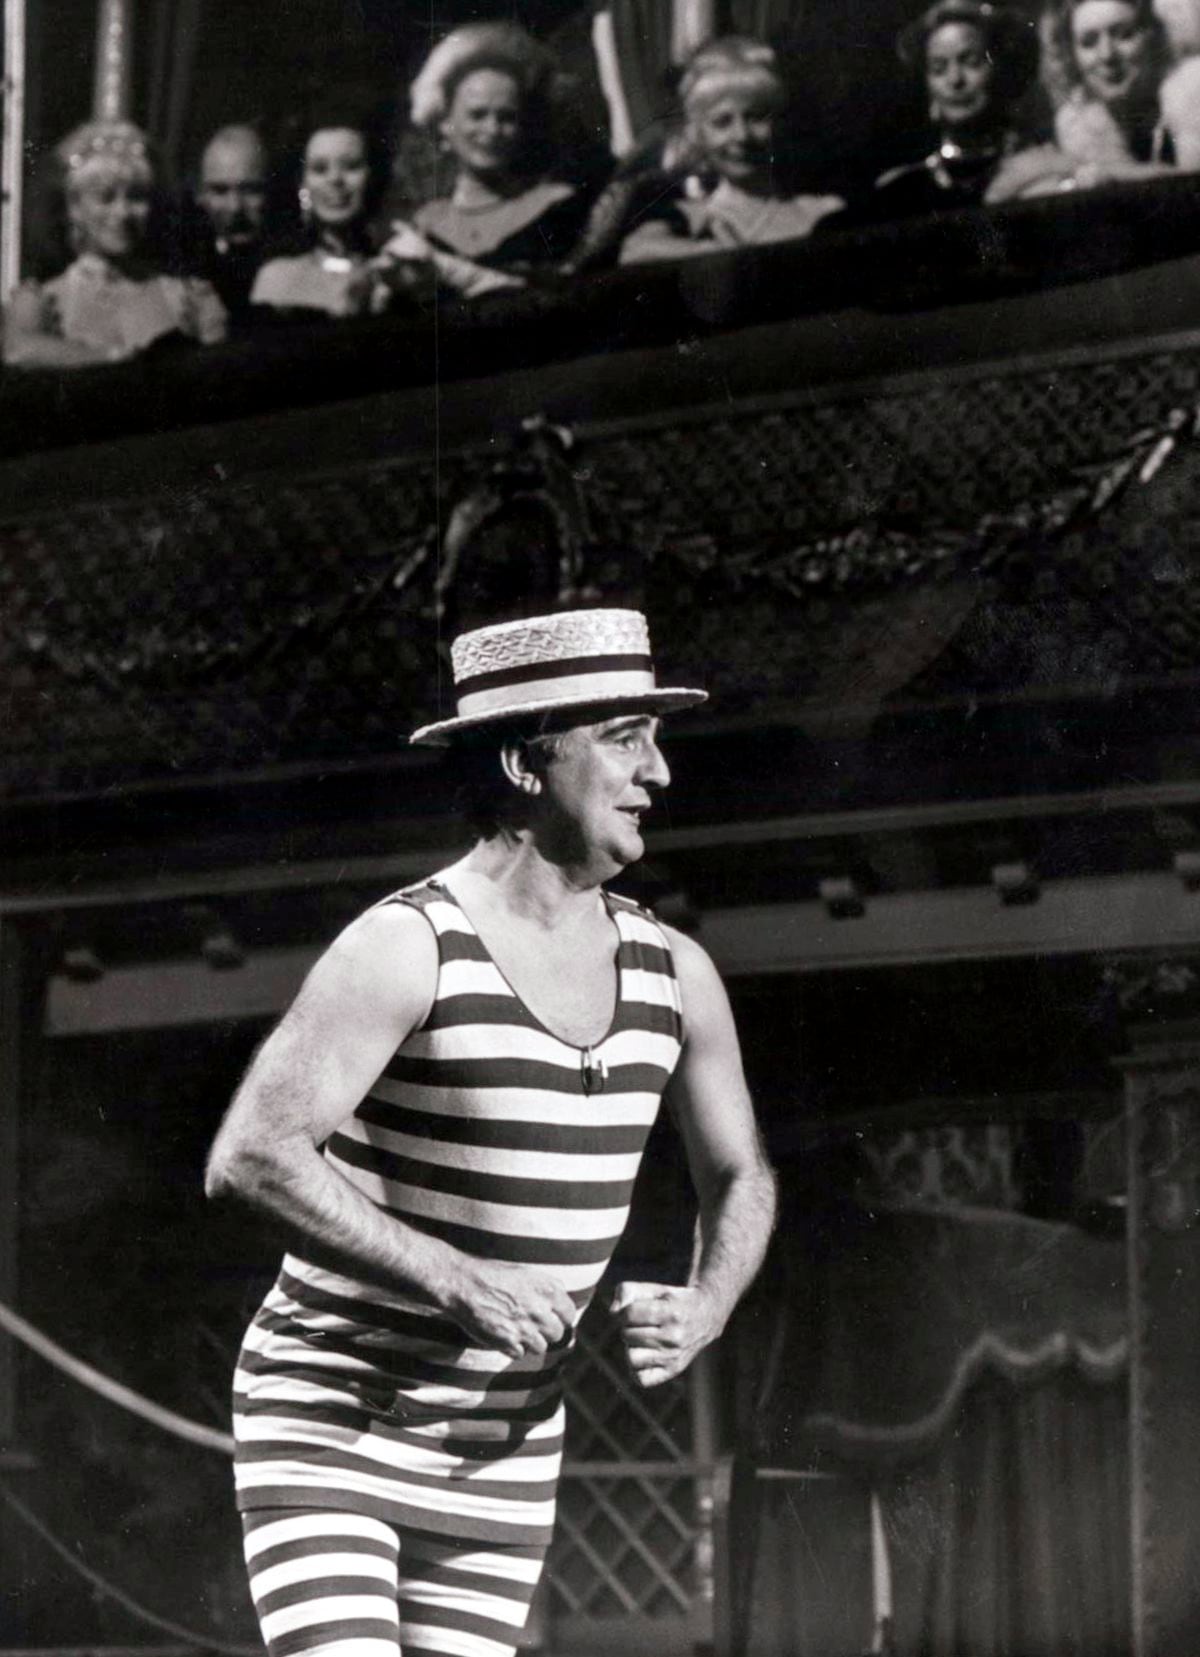 No-one could model an Edwardian bathing costume and boater hat better than Billy Dainty, pictured here in The Good Old Days, on BBC1 in 1980